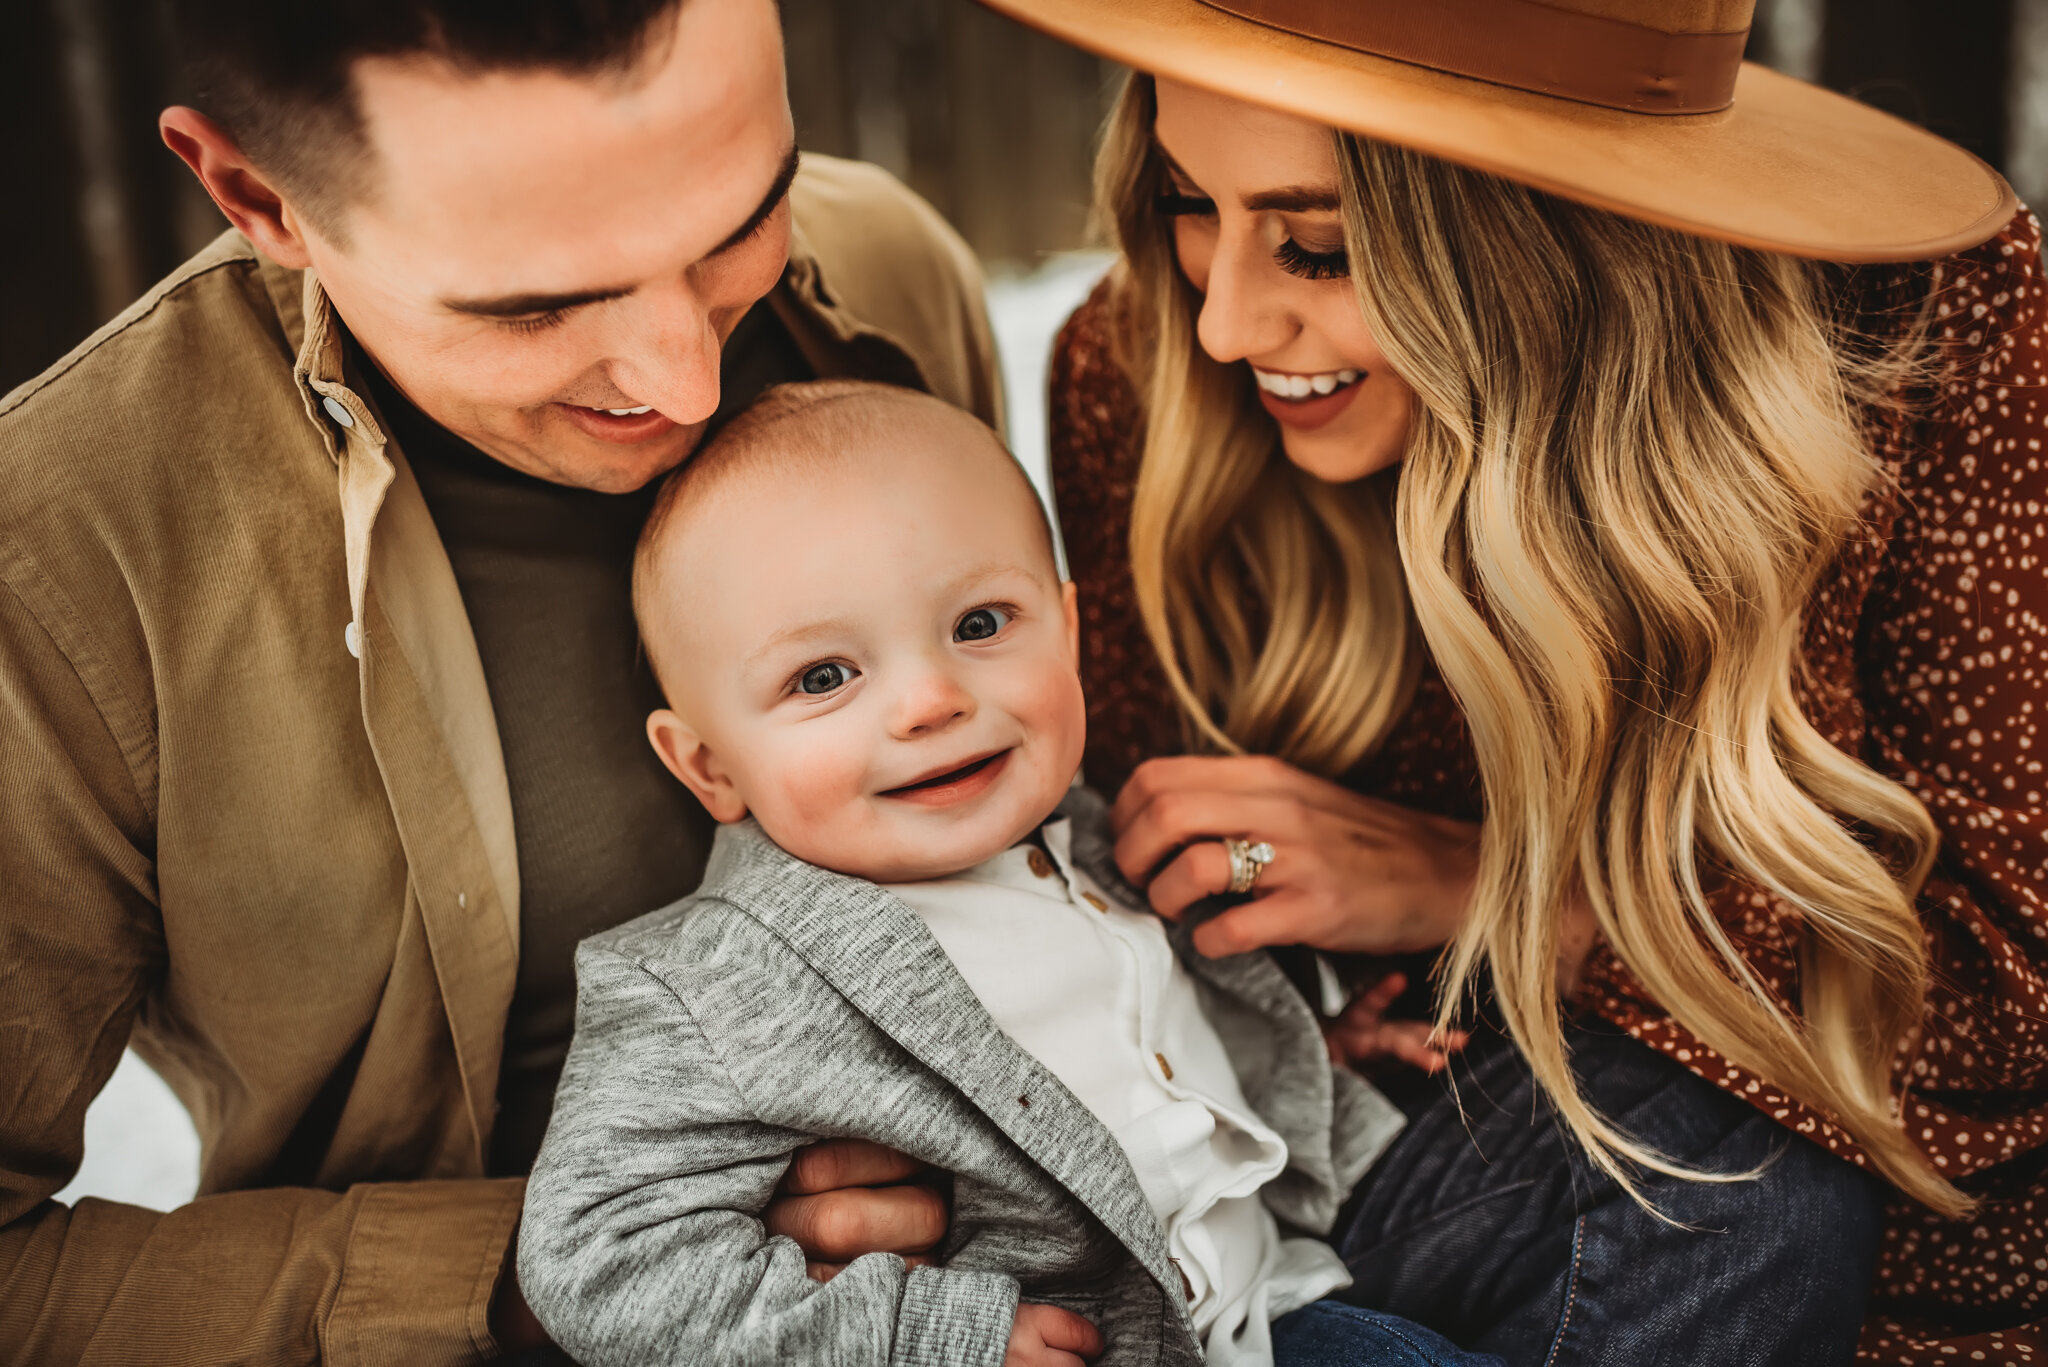 Peoria Family Photographer-Baby smiles at camera while parents tickle